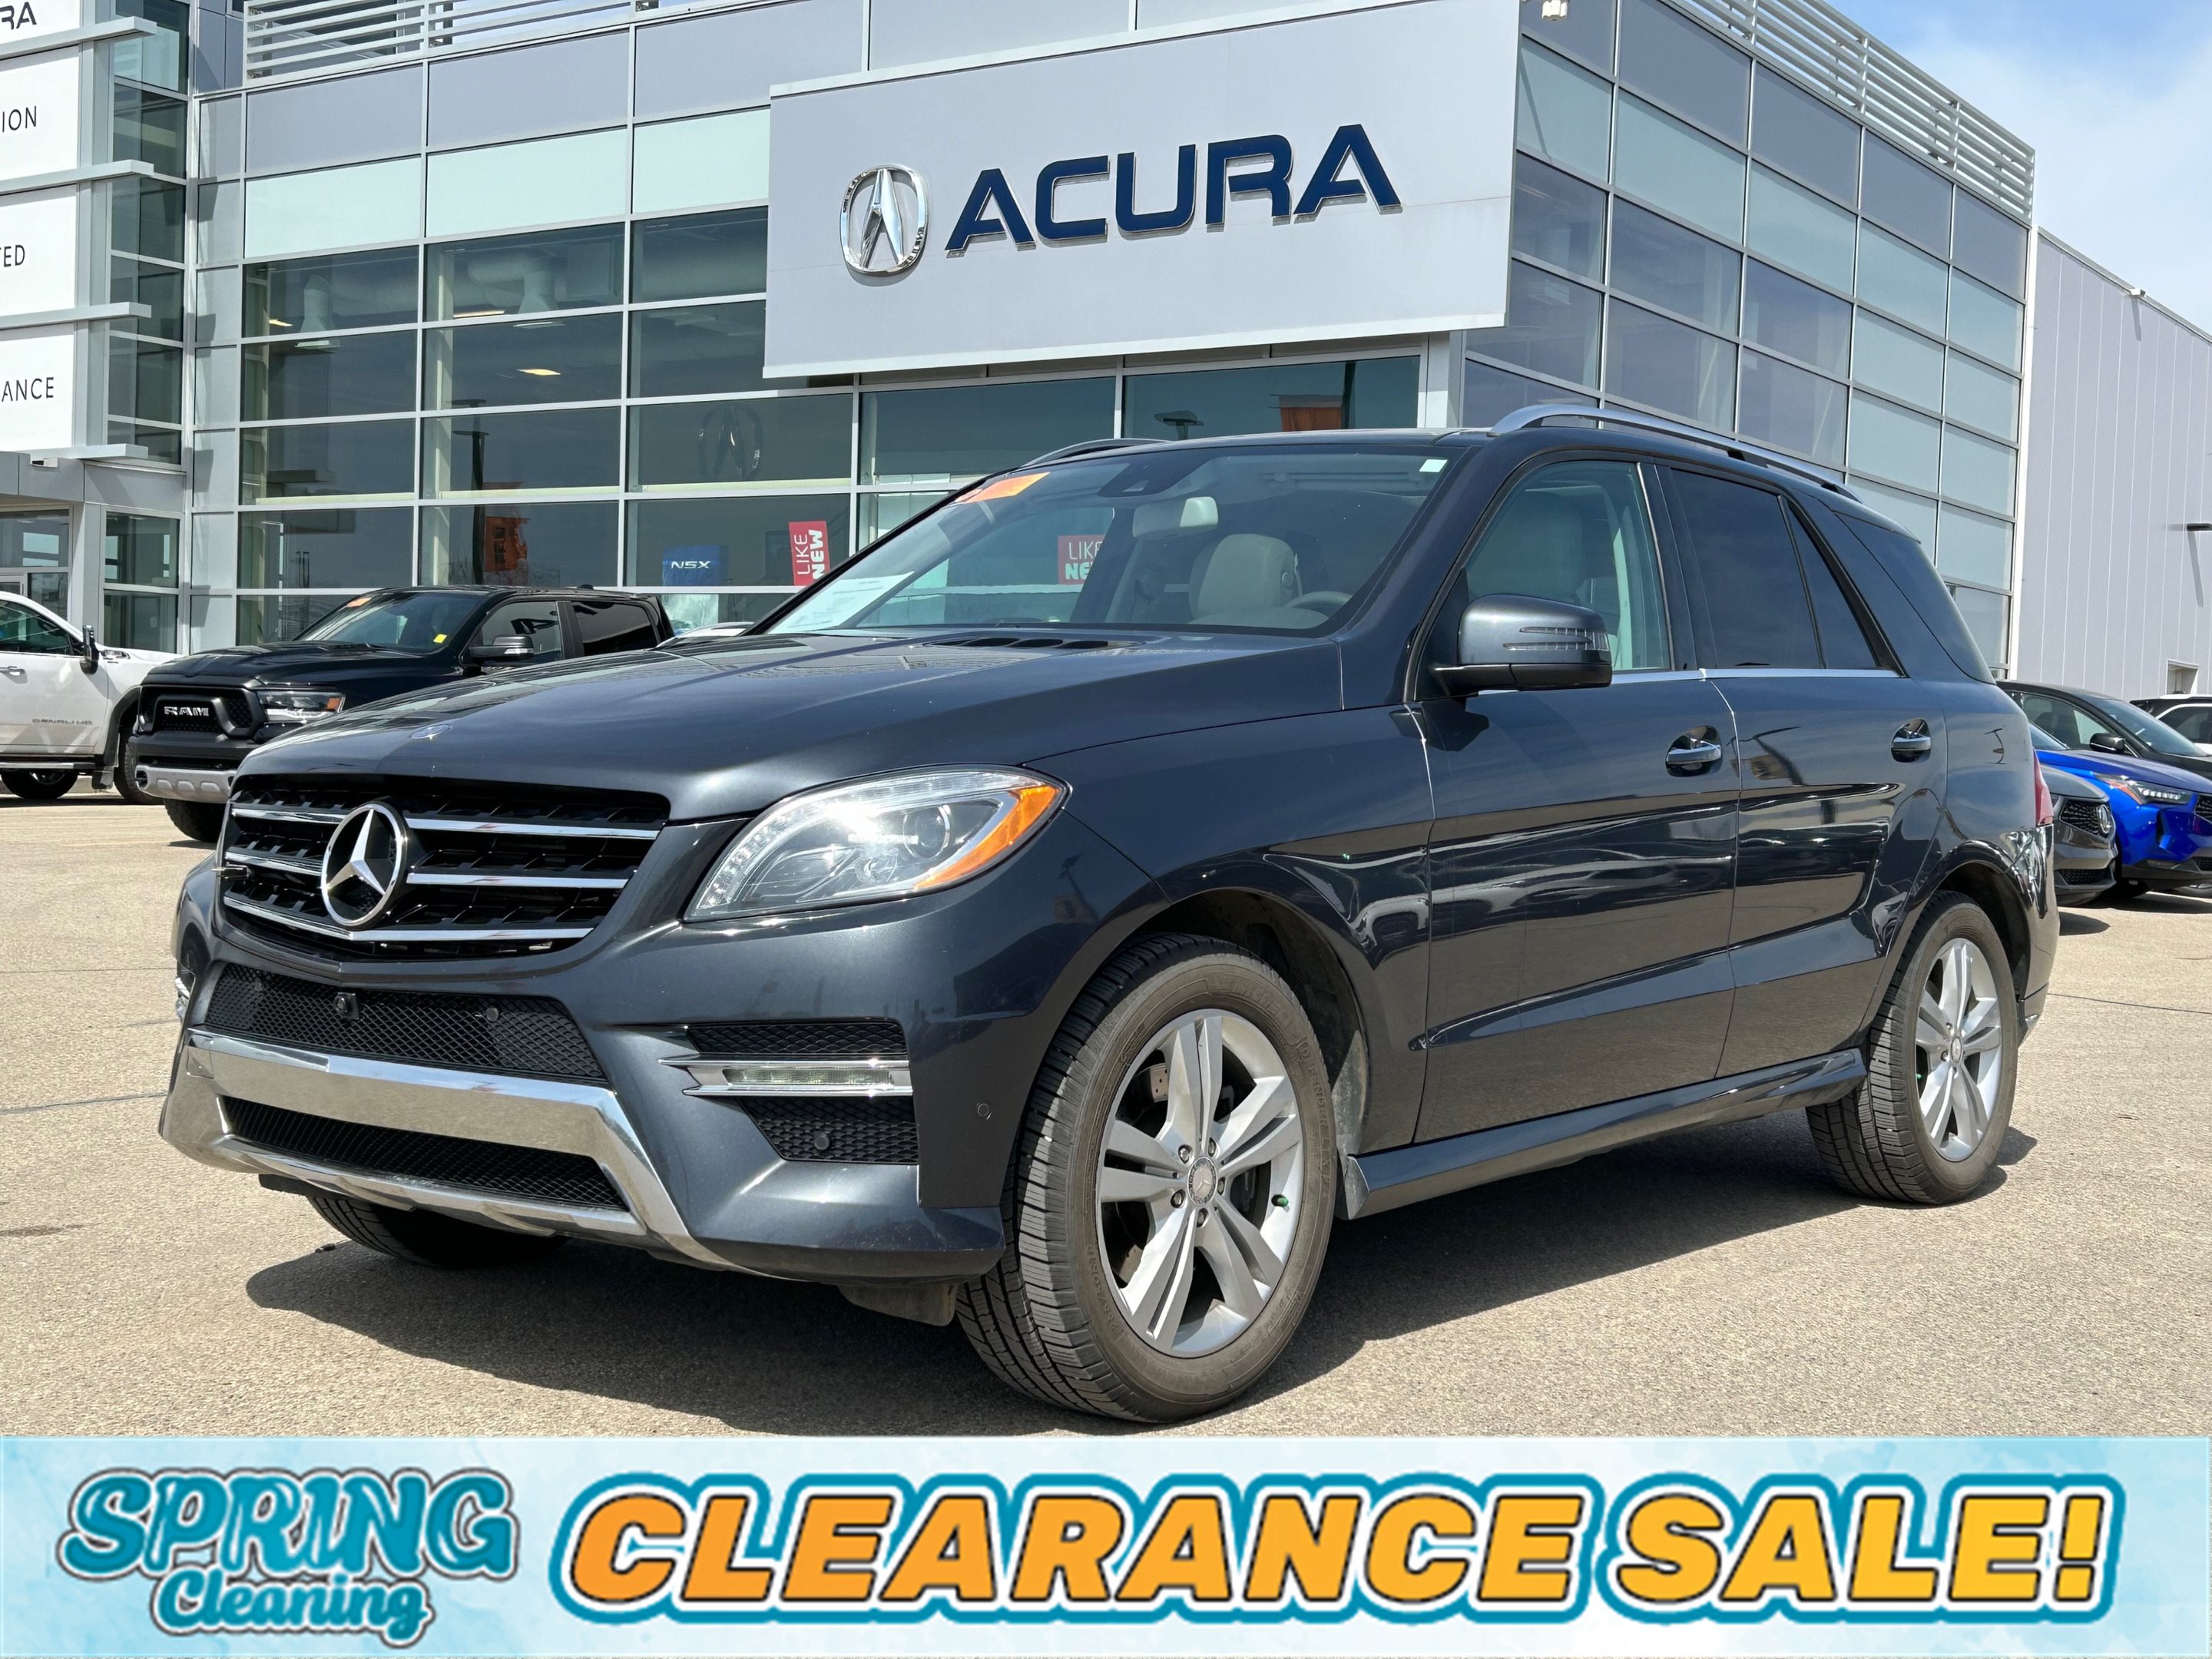 2014 Mercedes-Benz M-Class ULTIMATE COMFORT WITH AMAZING SAVINGS!!!